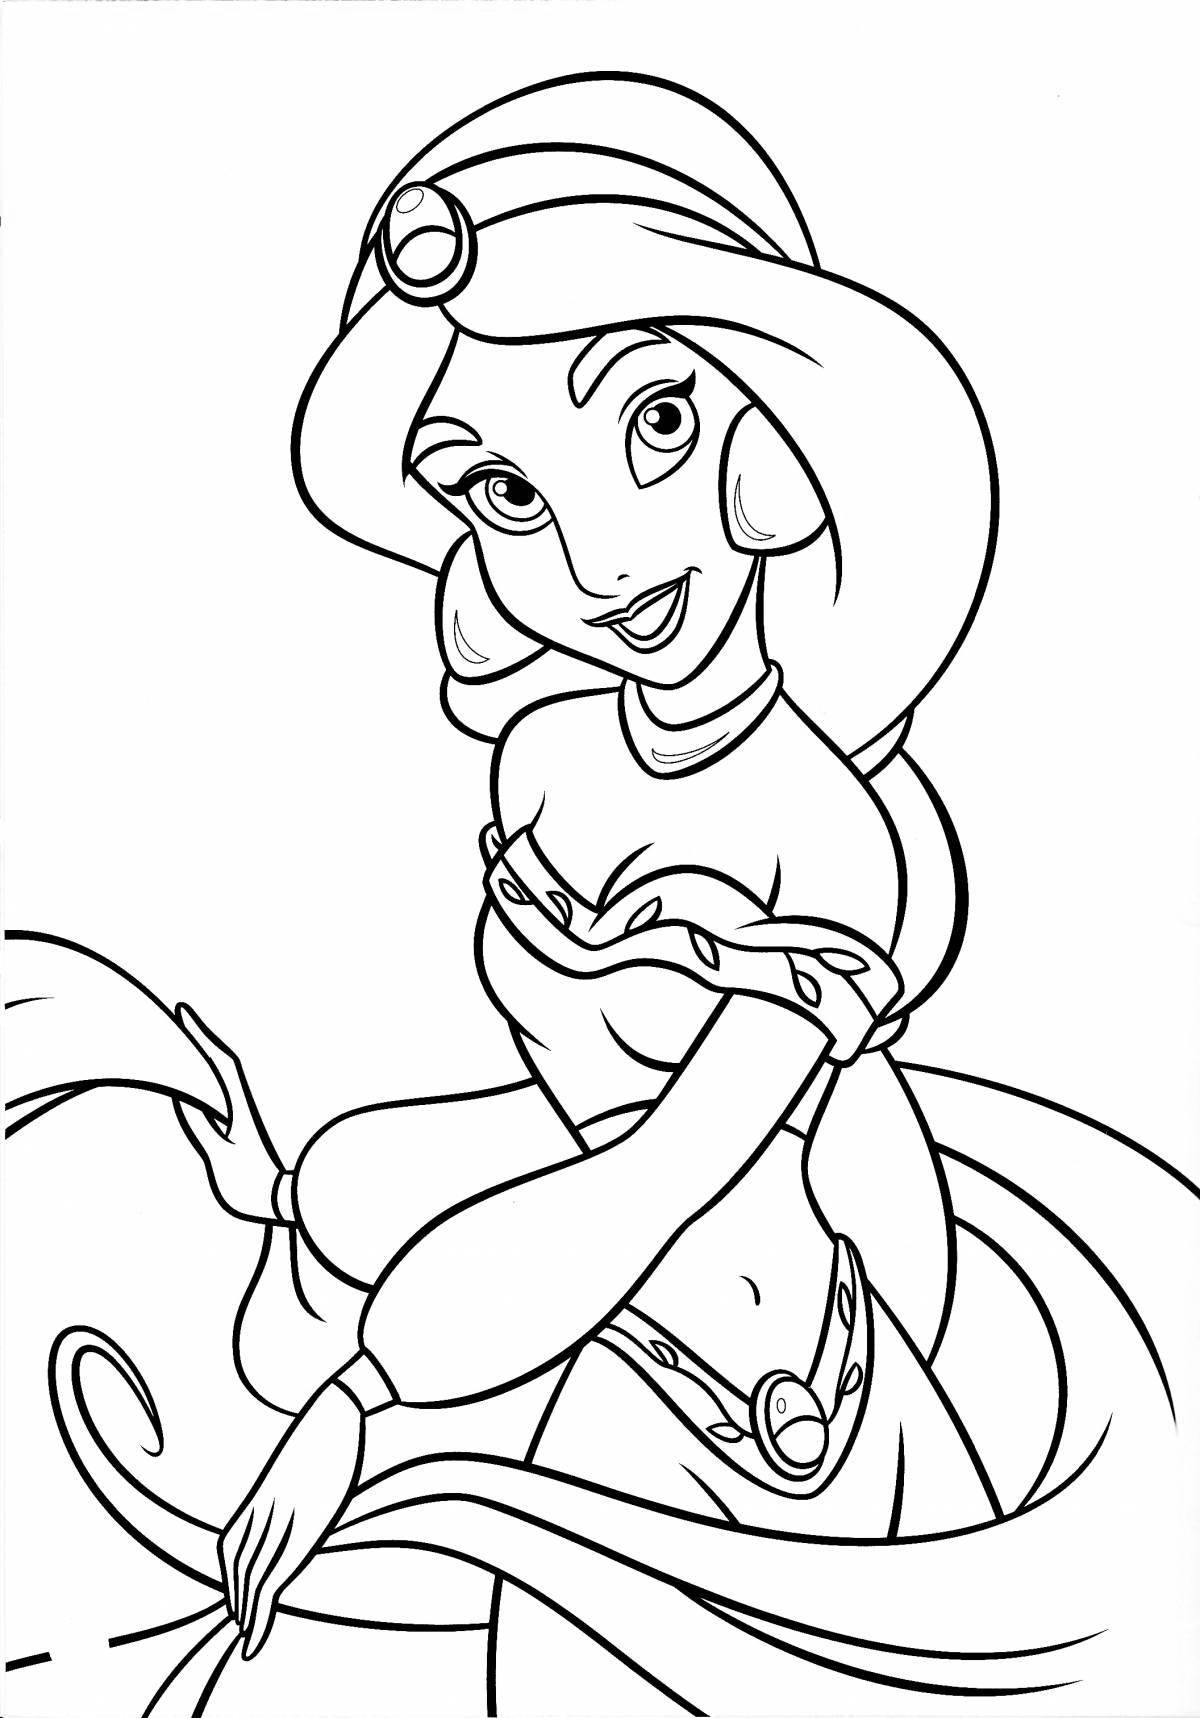 Fabulous jasmine coloring page